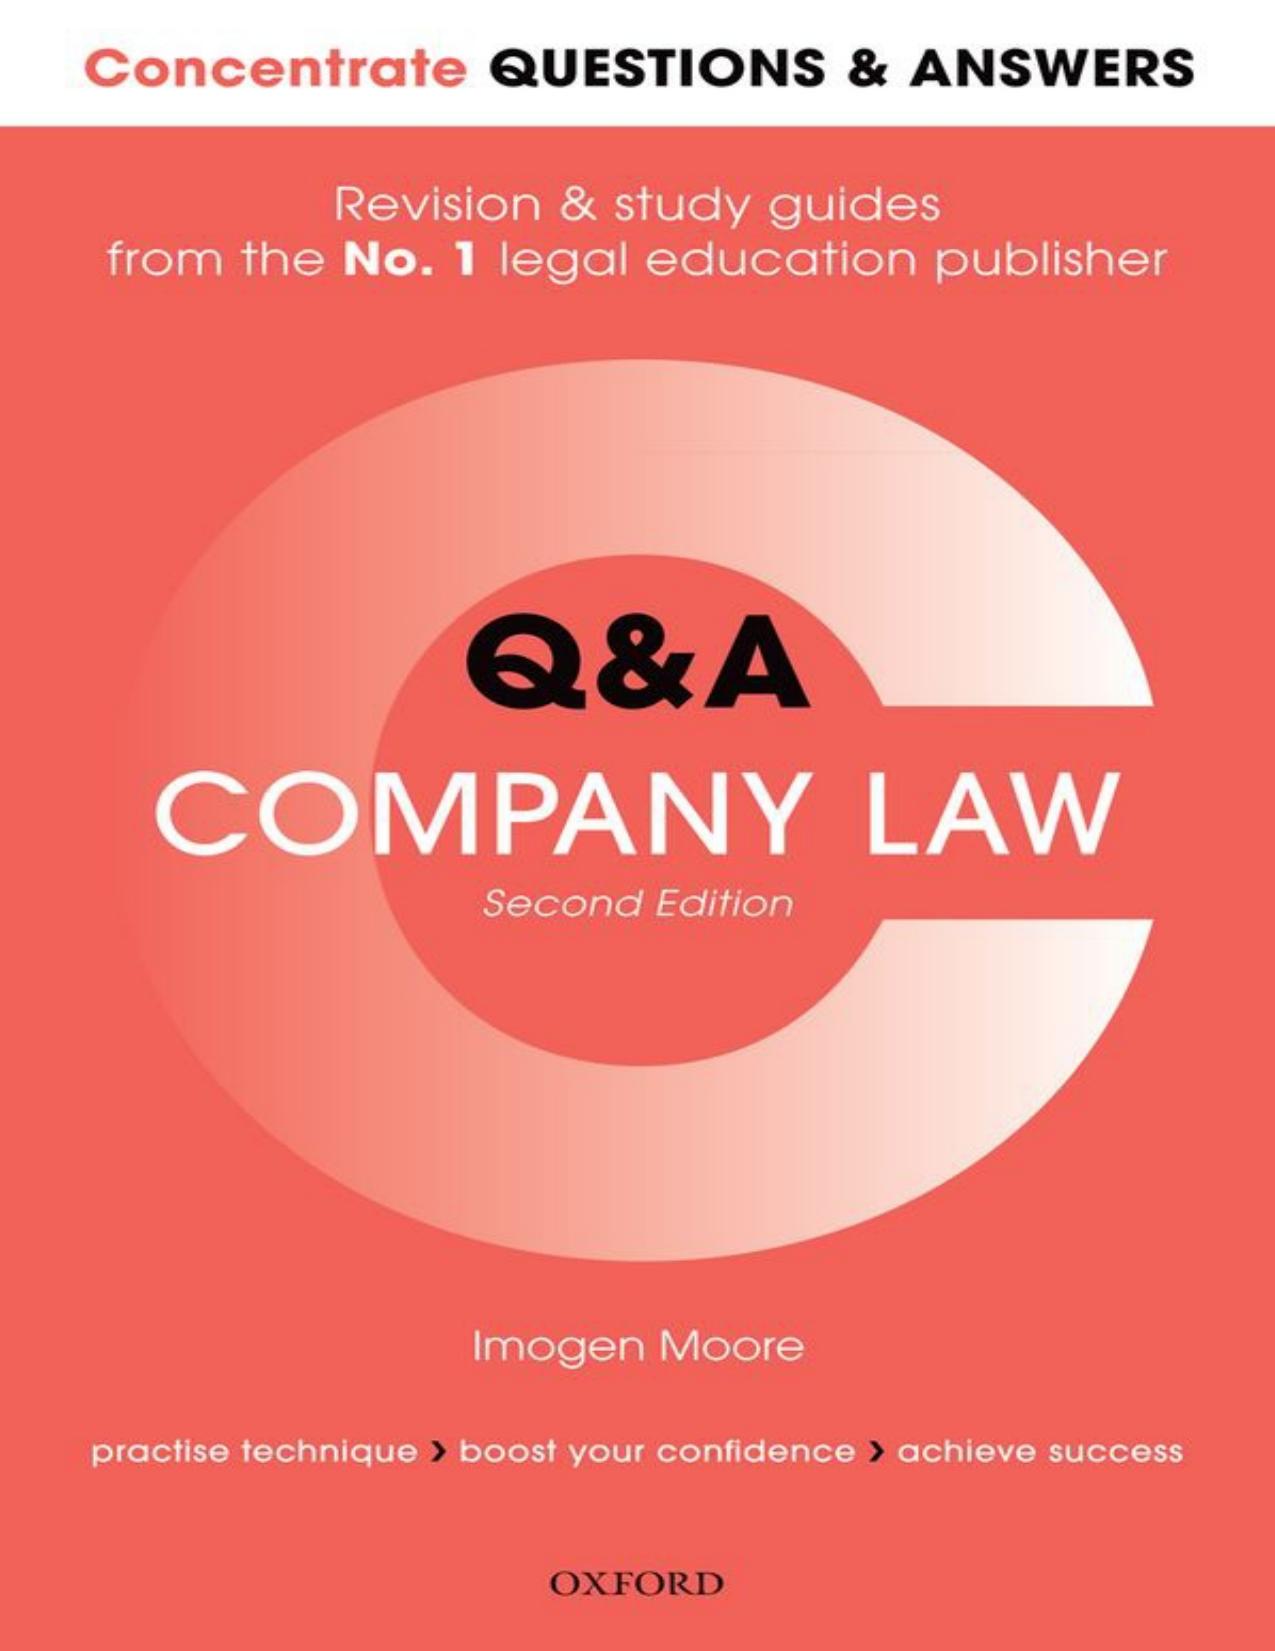 Concentrate Questions and Answers Company Law 2nd Edition by Imogen Moore.jpg